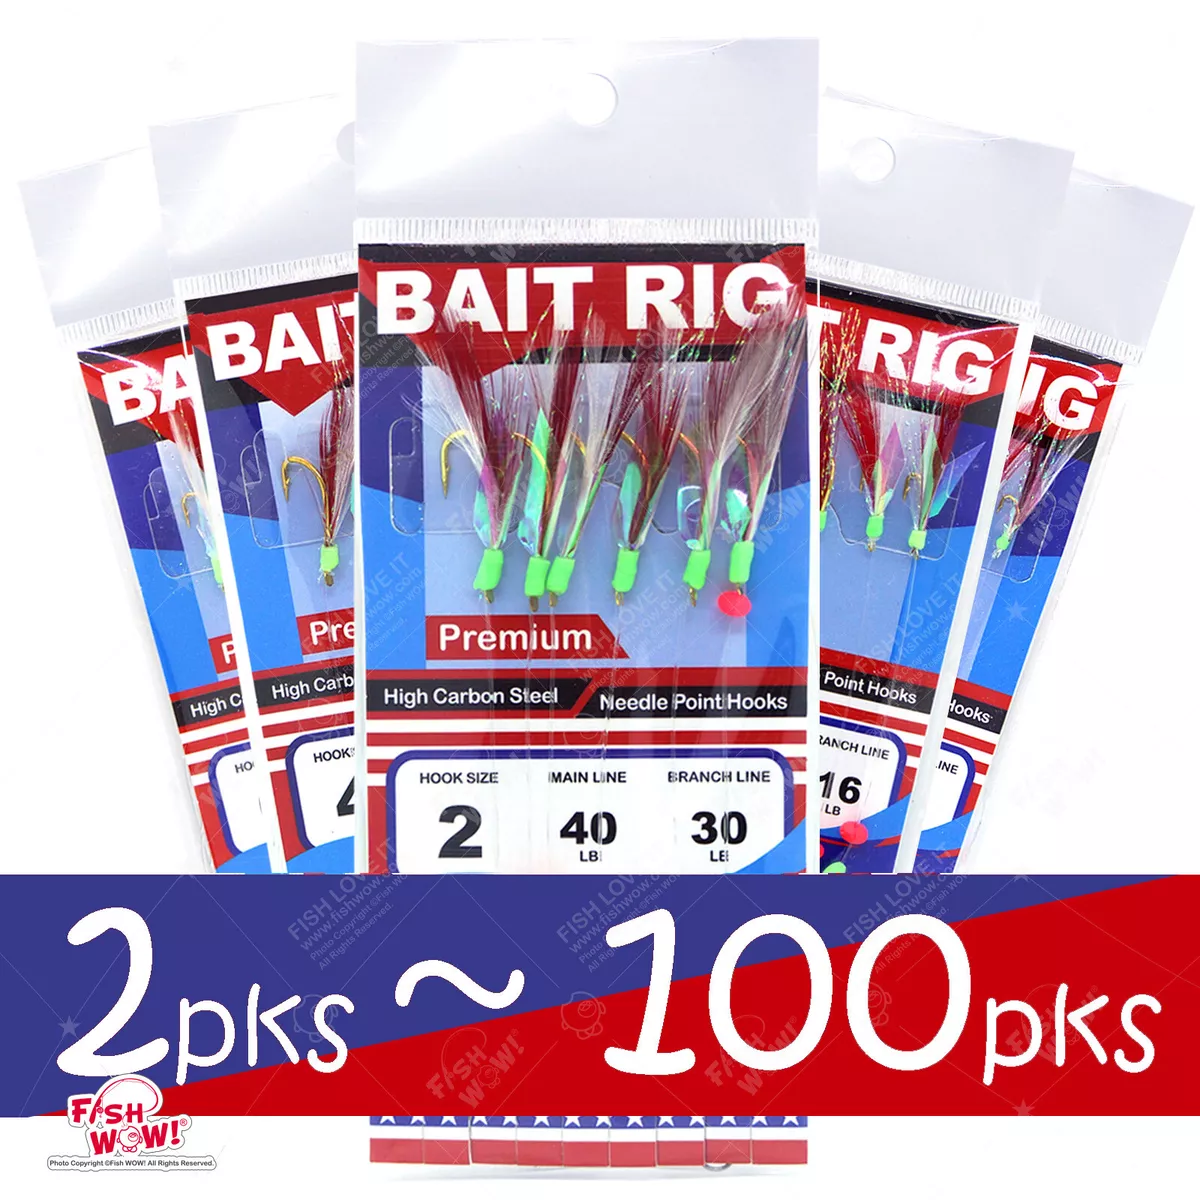 Fishing Sabiki Bait Rig Red White Feather Gold 6-hook Size 2,4,6,8,10,12,14  lot